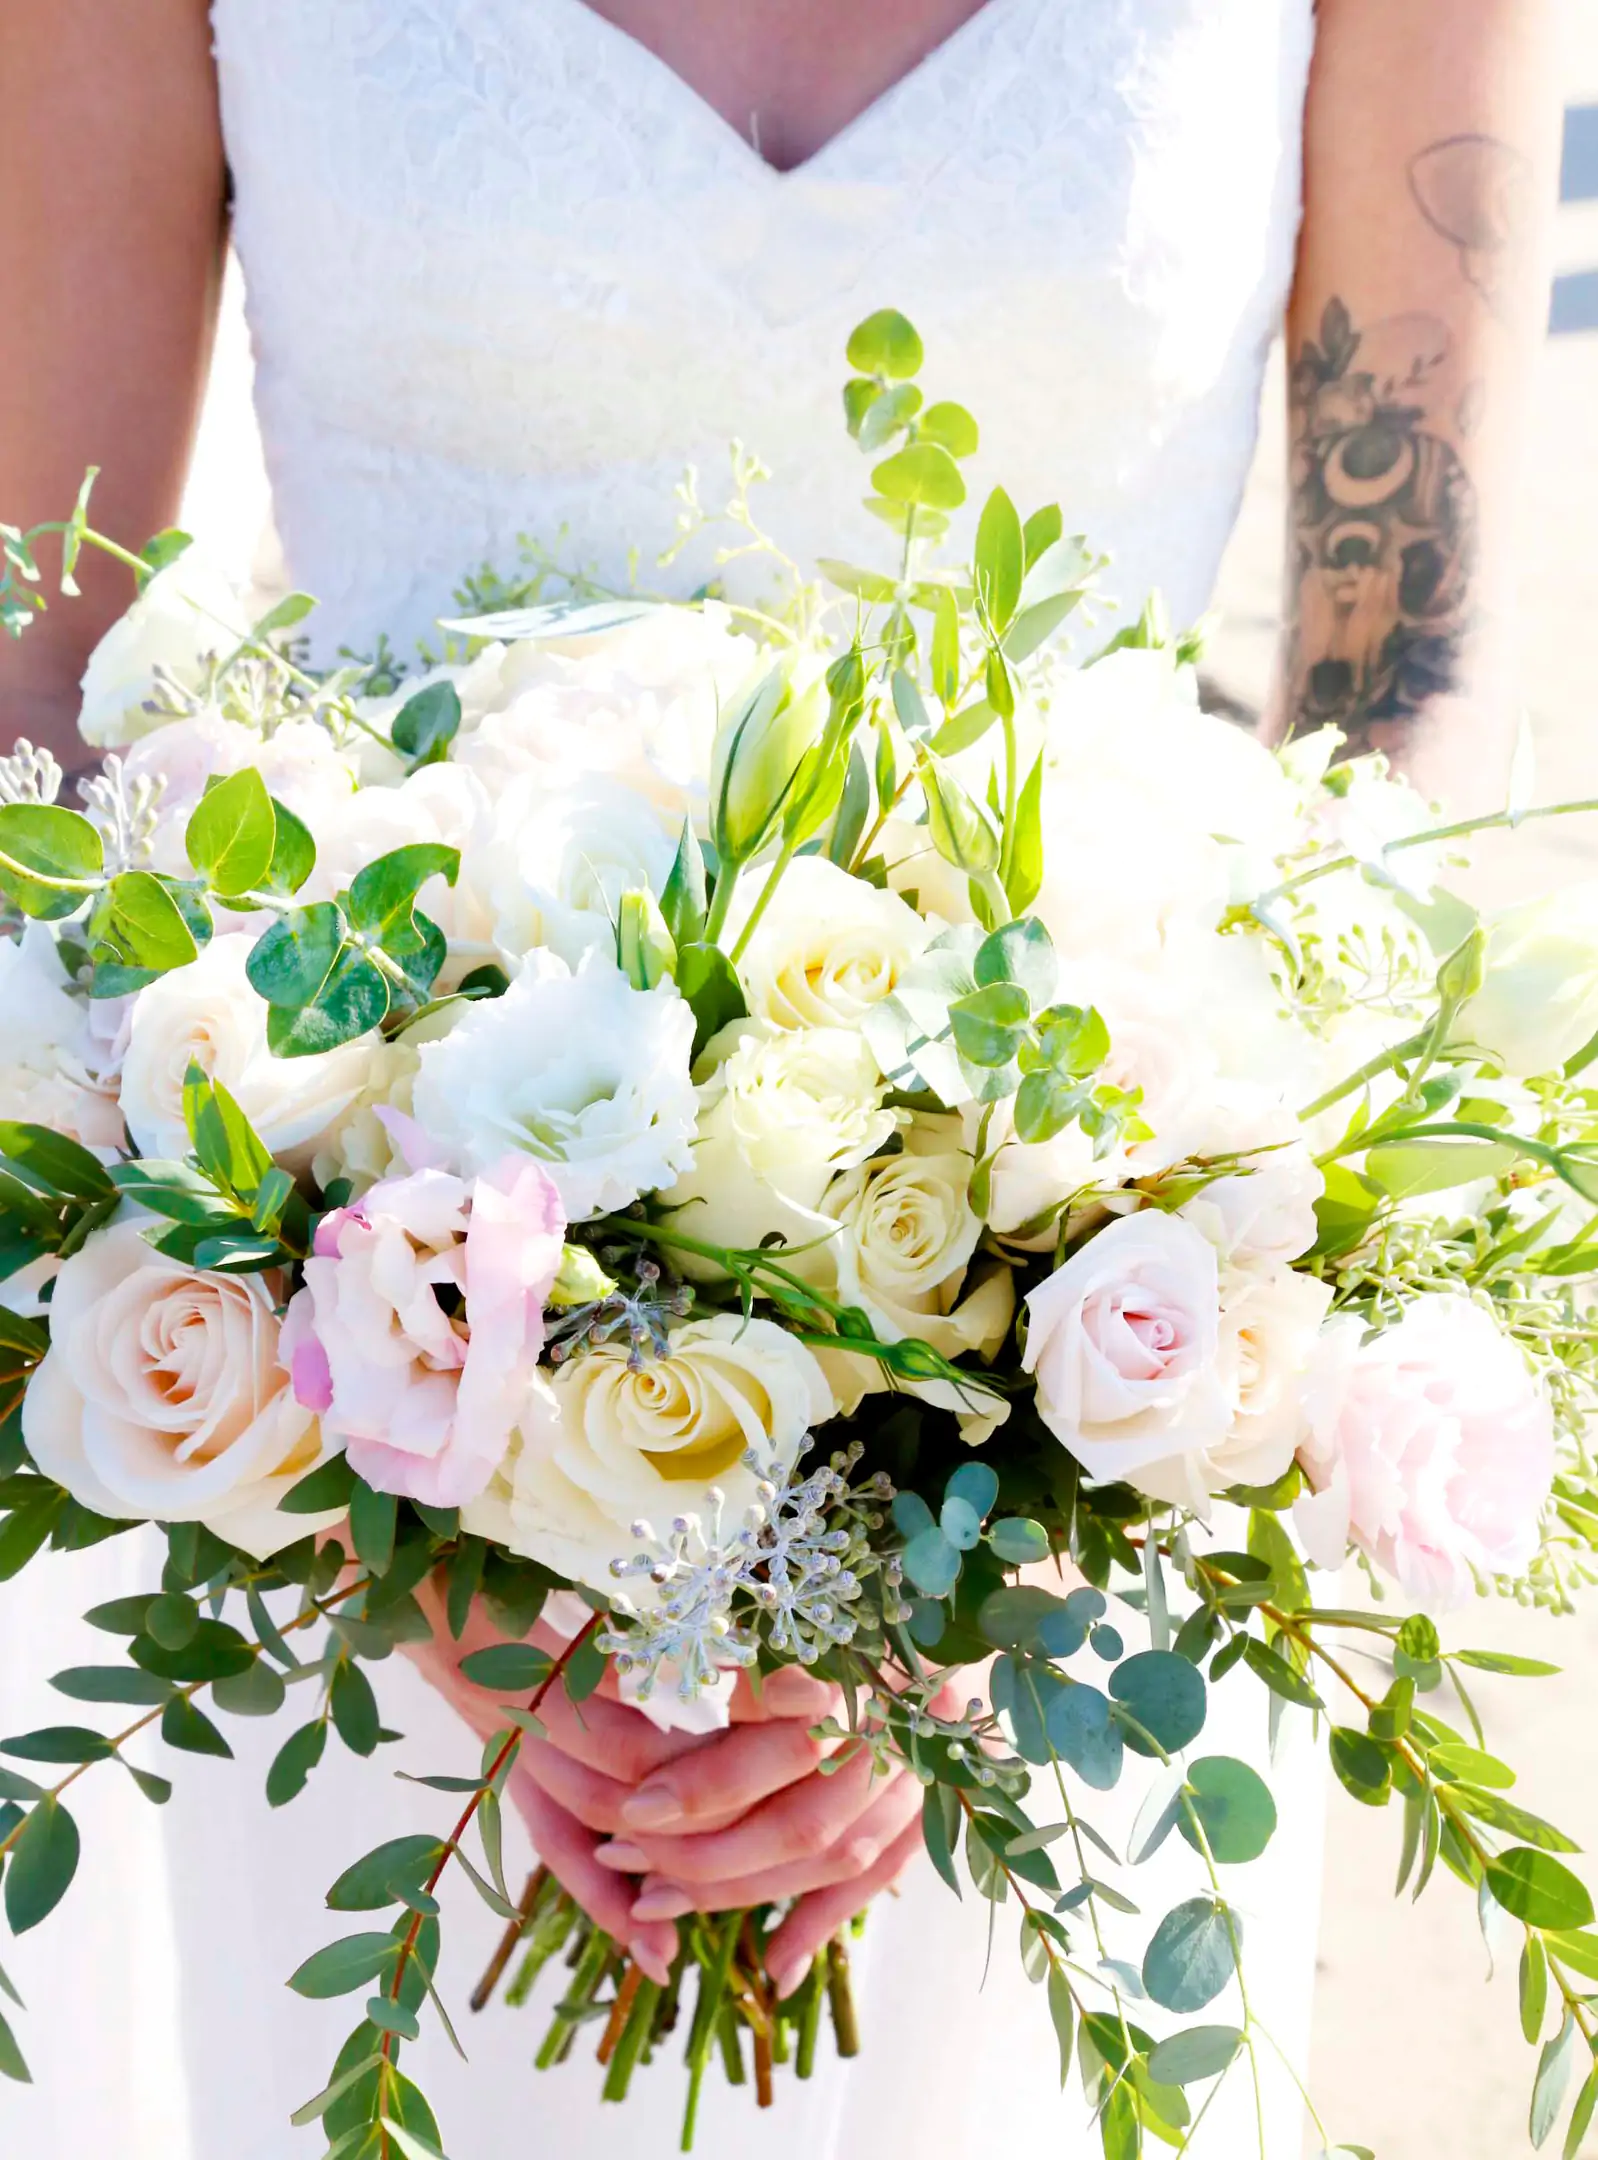 Lillian carried a lush bouquet of soft roses and bright greenery